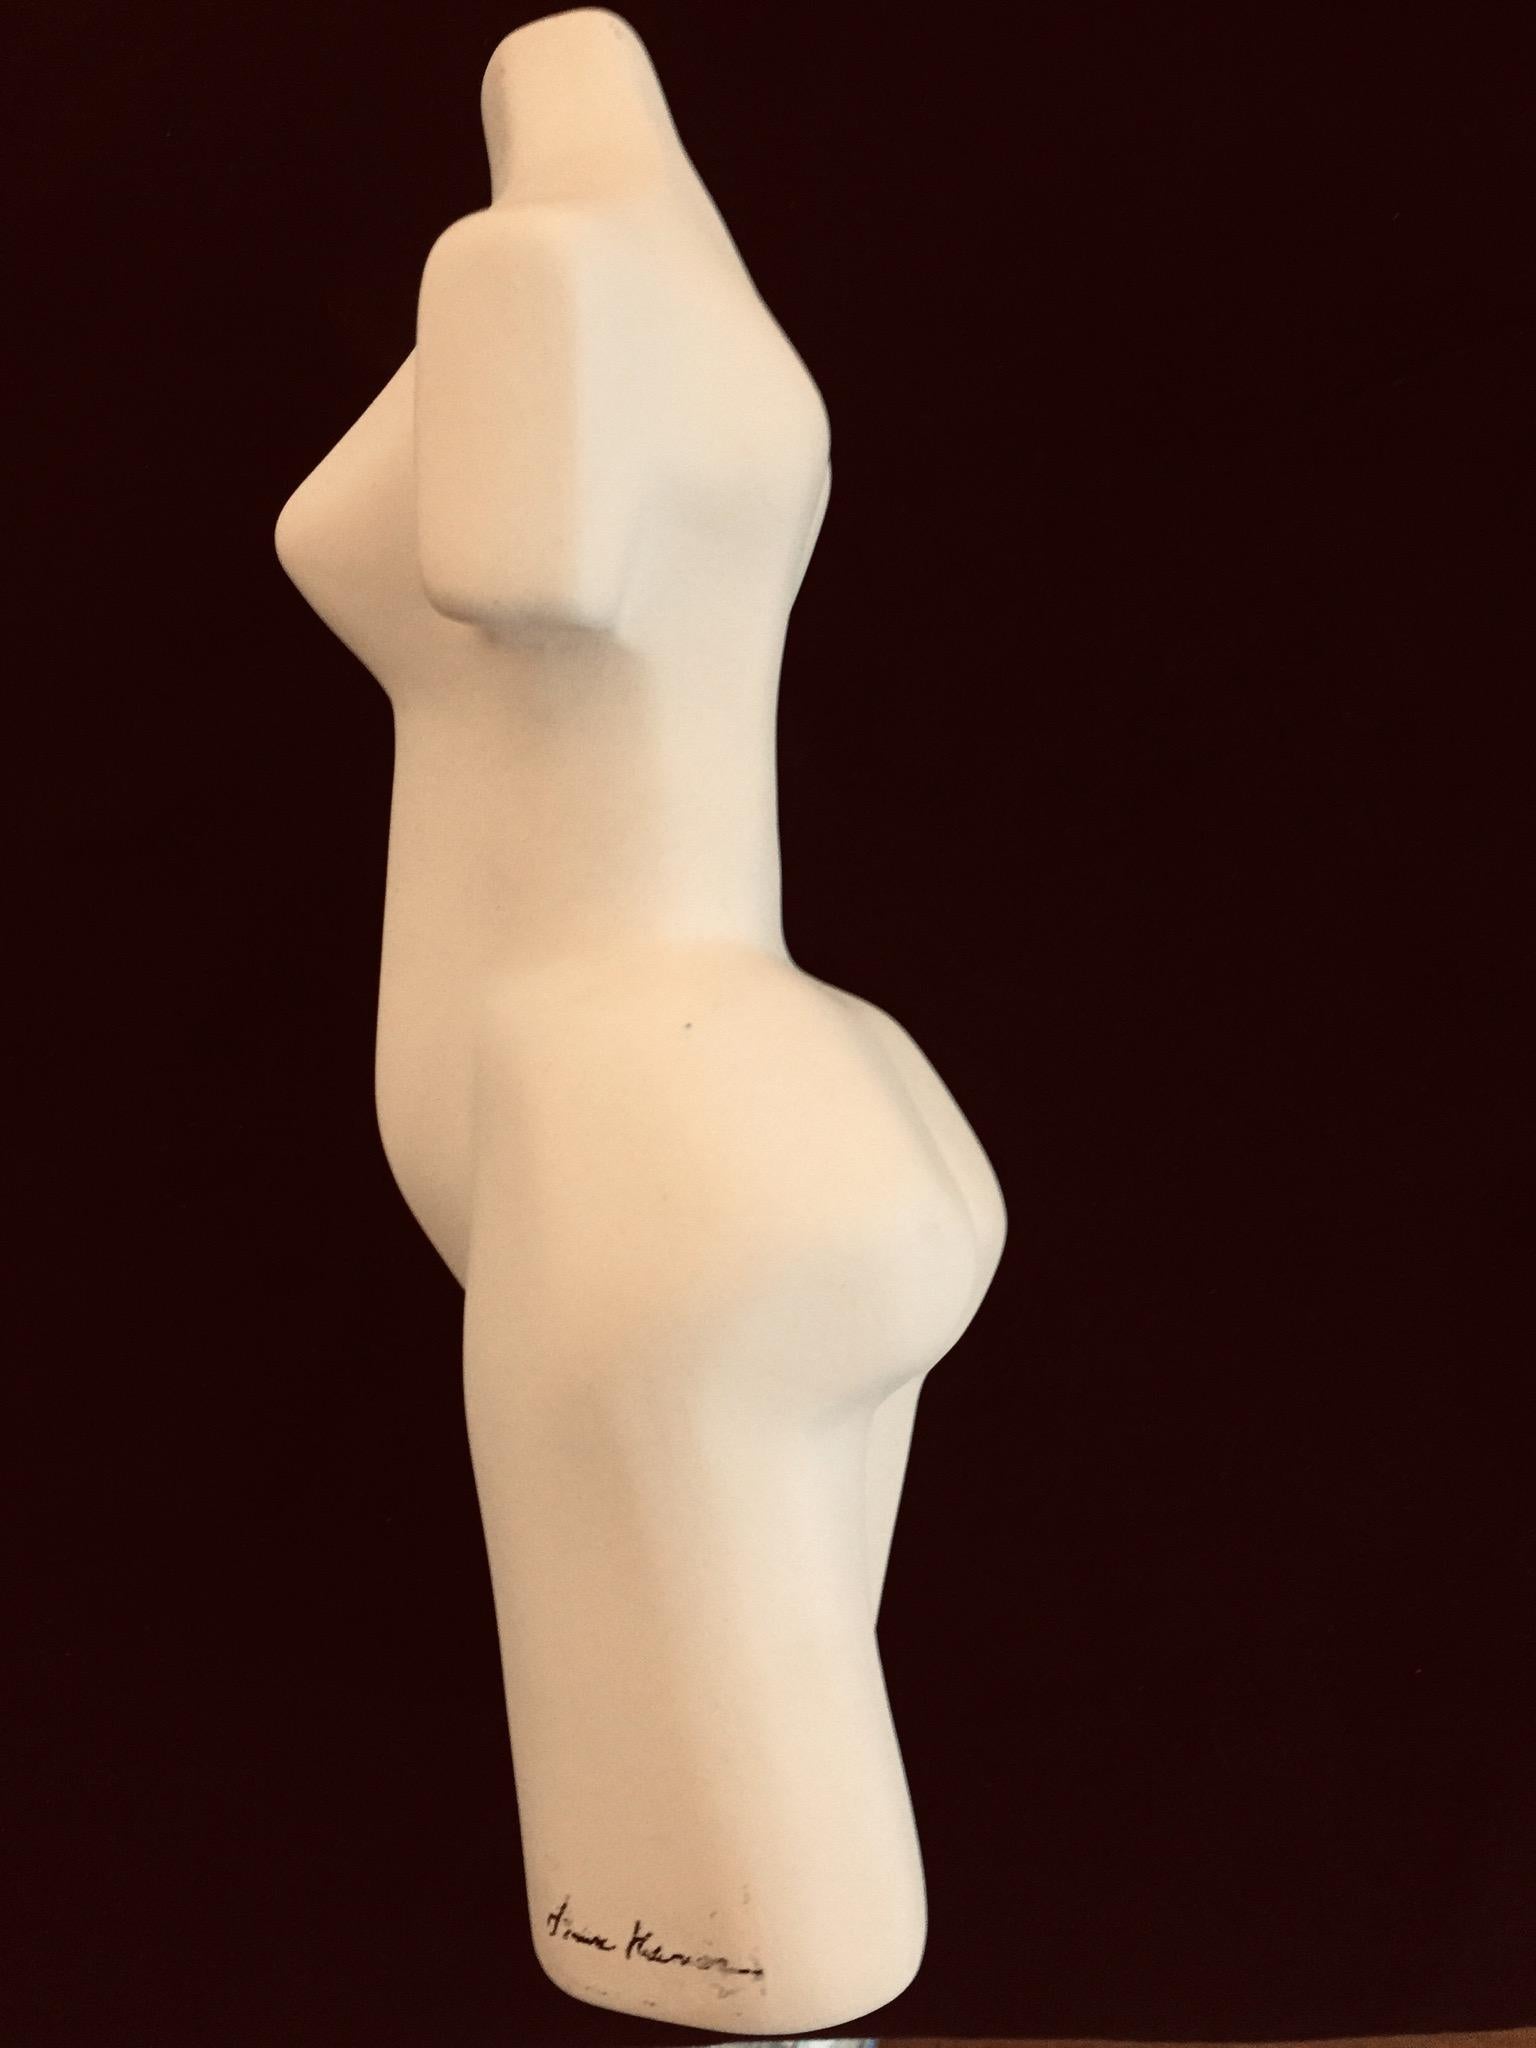 Figurative unglazed ceramic female sculpture. The natural color of the clay, paired with the robust physique is what called us to this piece. Signed at right as she faces the viewer, but we cannot determine the artist’s name. There are small, yet